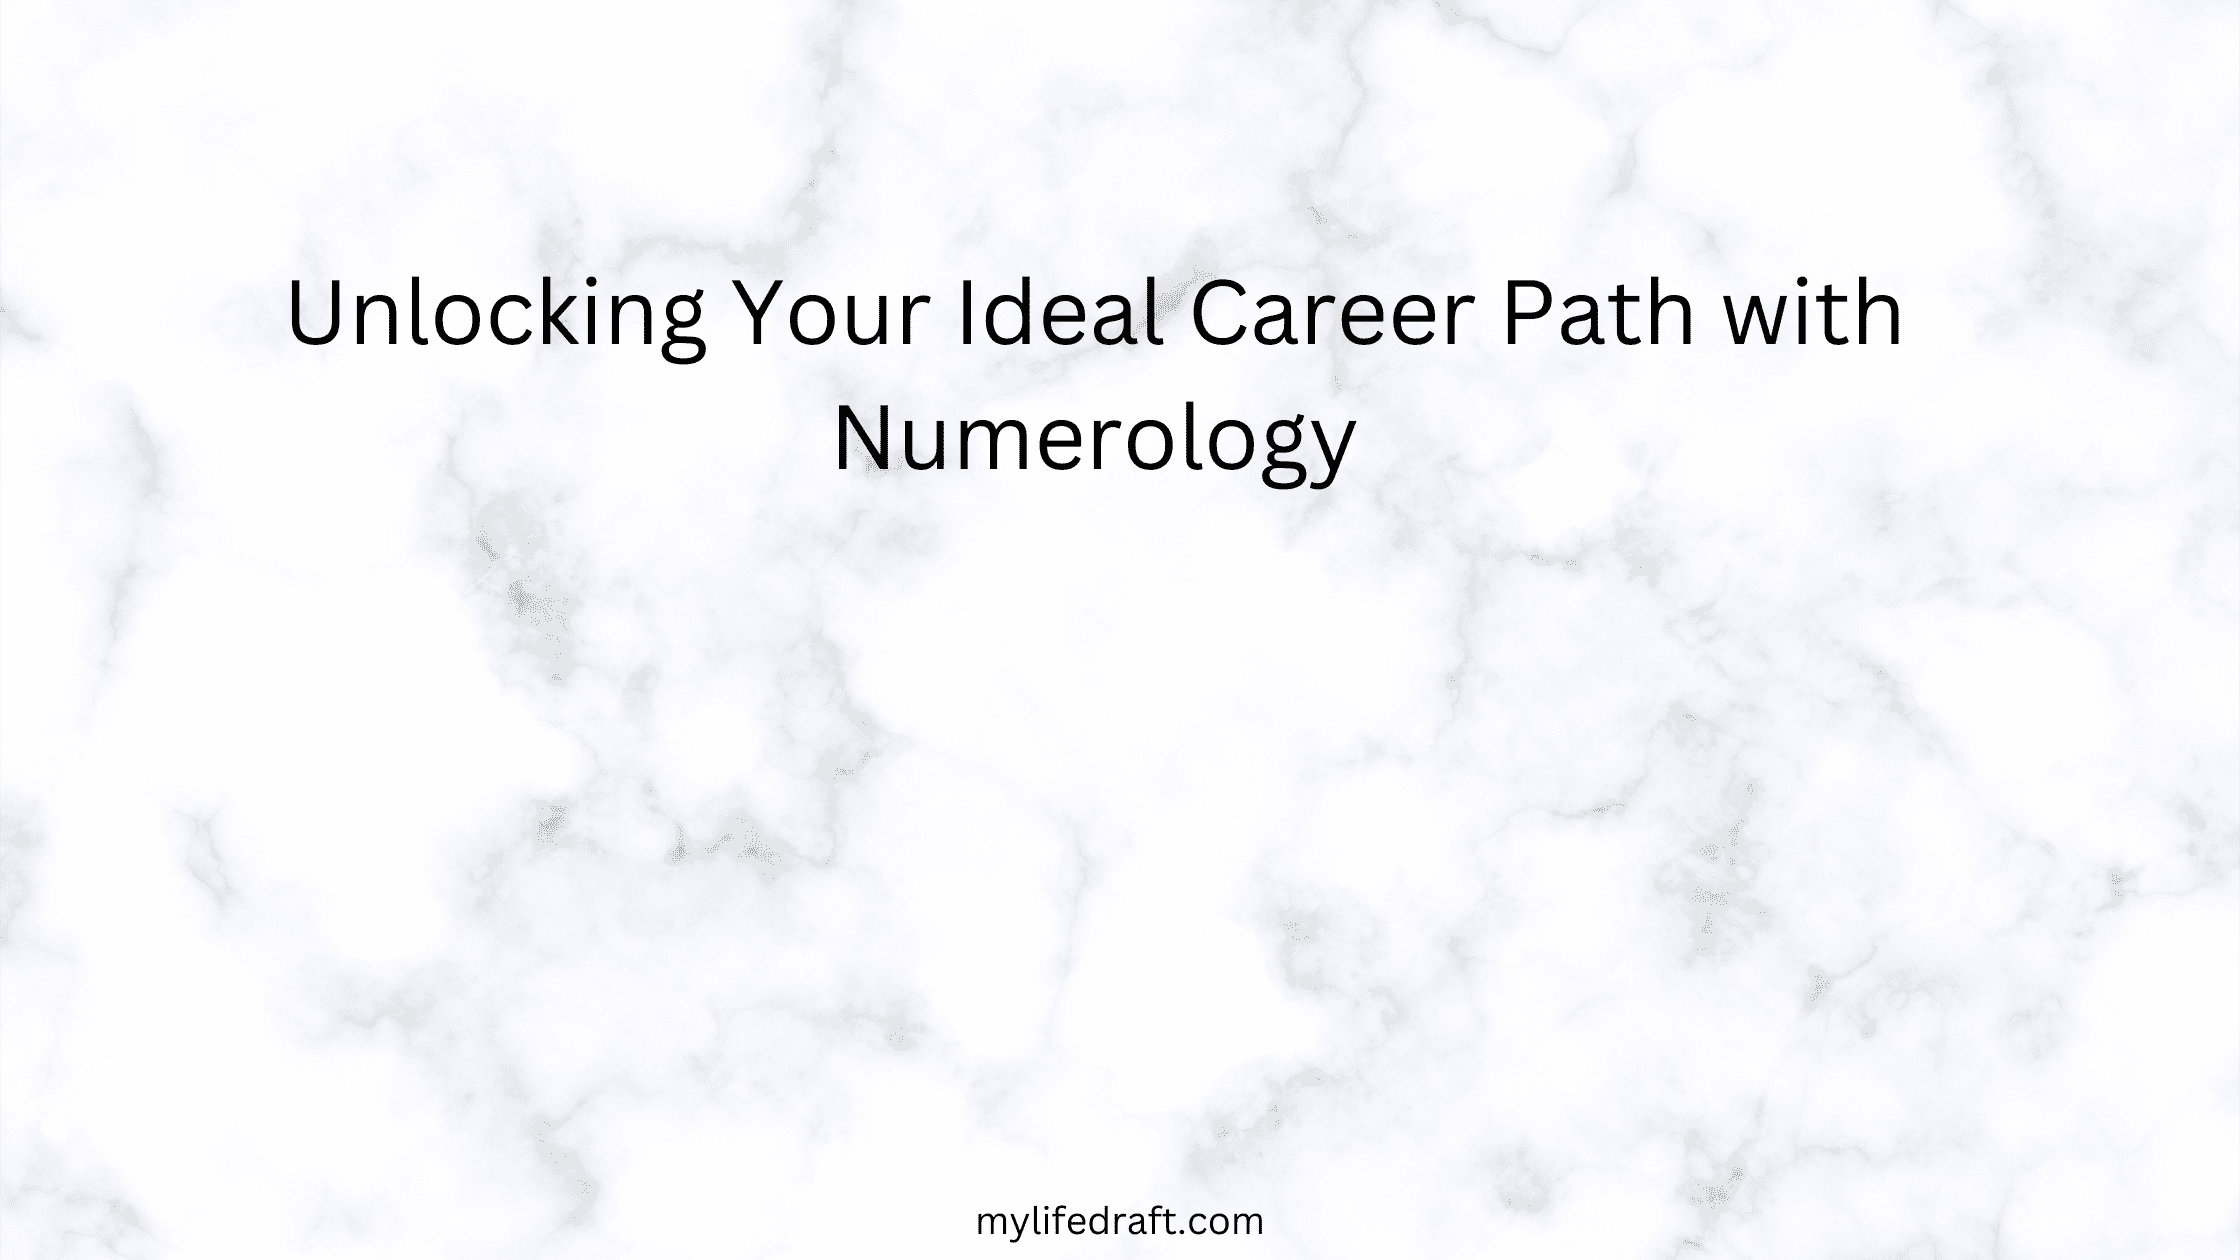 Unlocking Your Ideal Career Path with Numerology